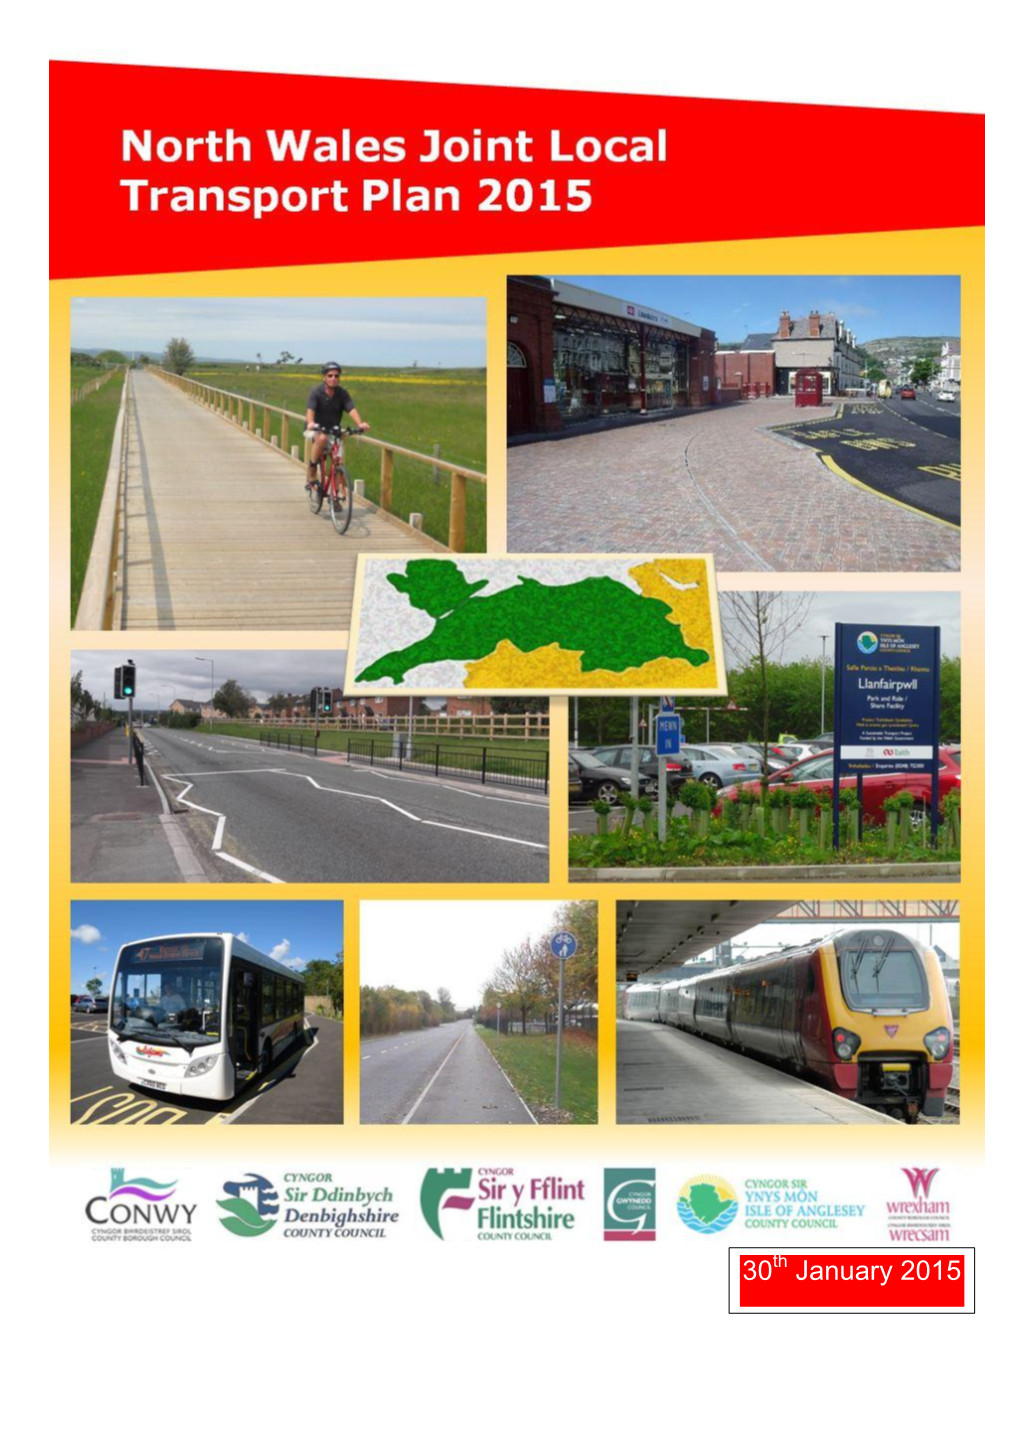 North Wales Joint Local Transport Plan 2015